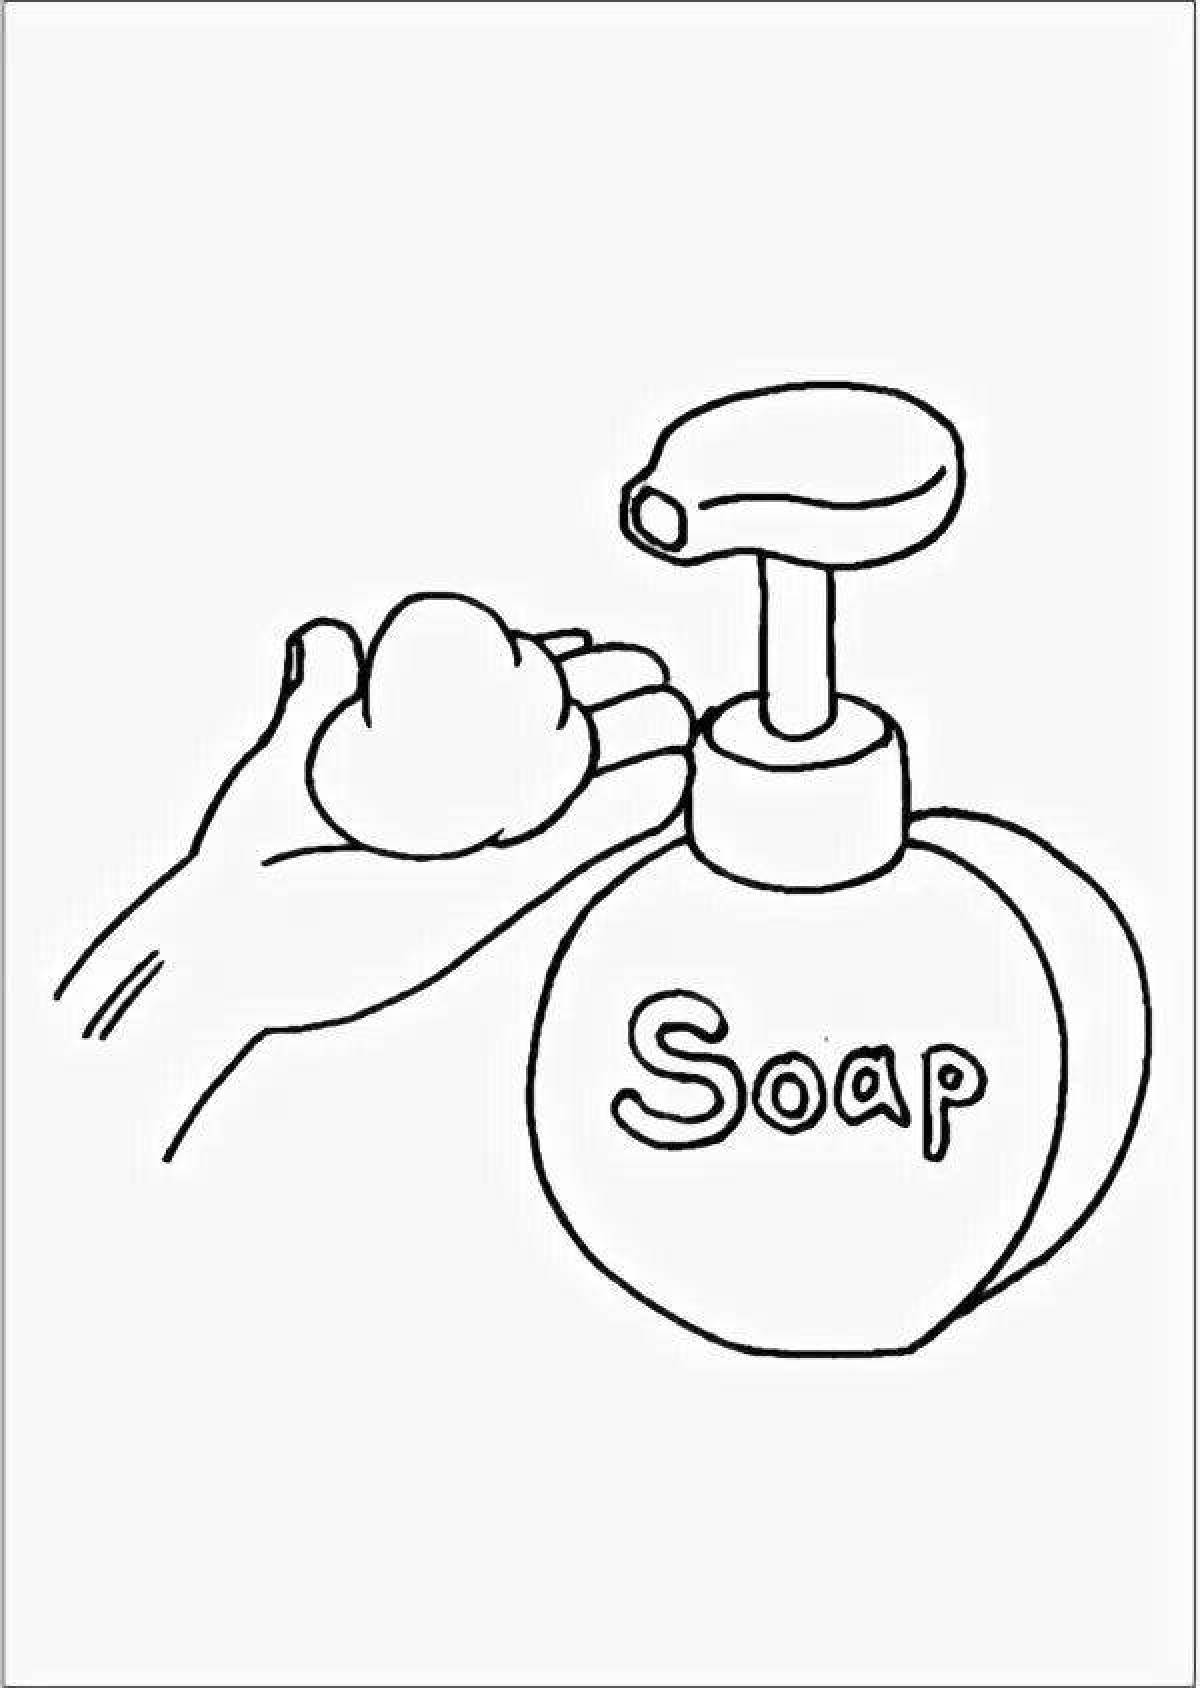 Great soap coloring page